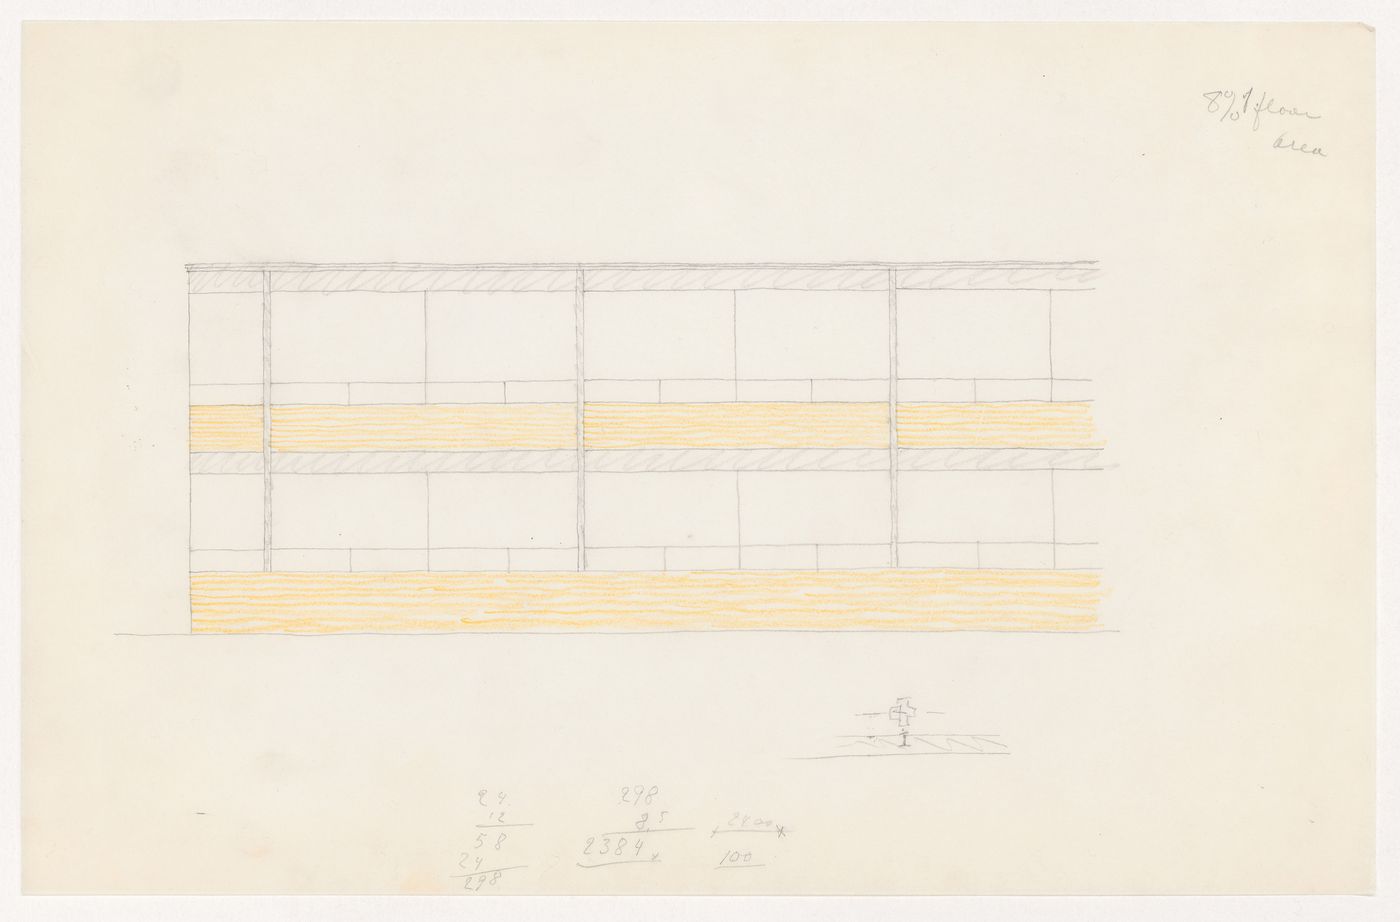 Partial sketch elevation and sketch detail for the Metallurgy Building, Illinois Institute of Technology, Chicago